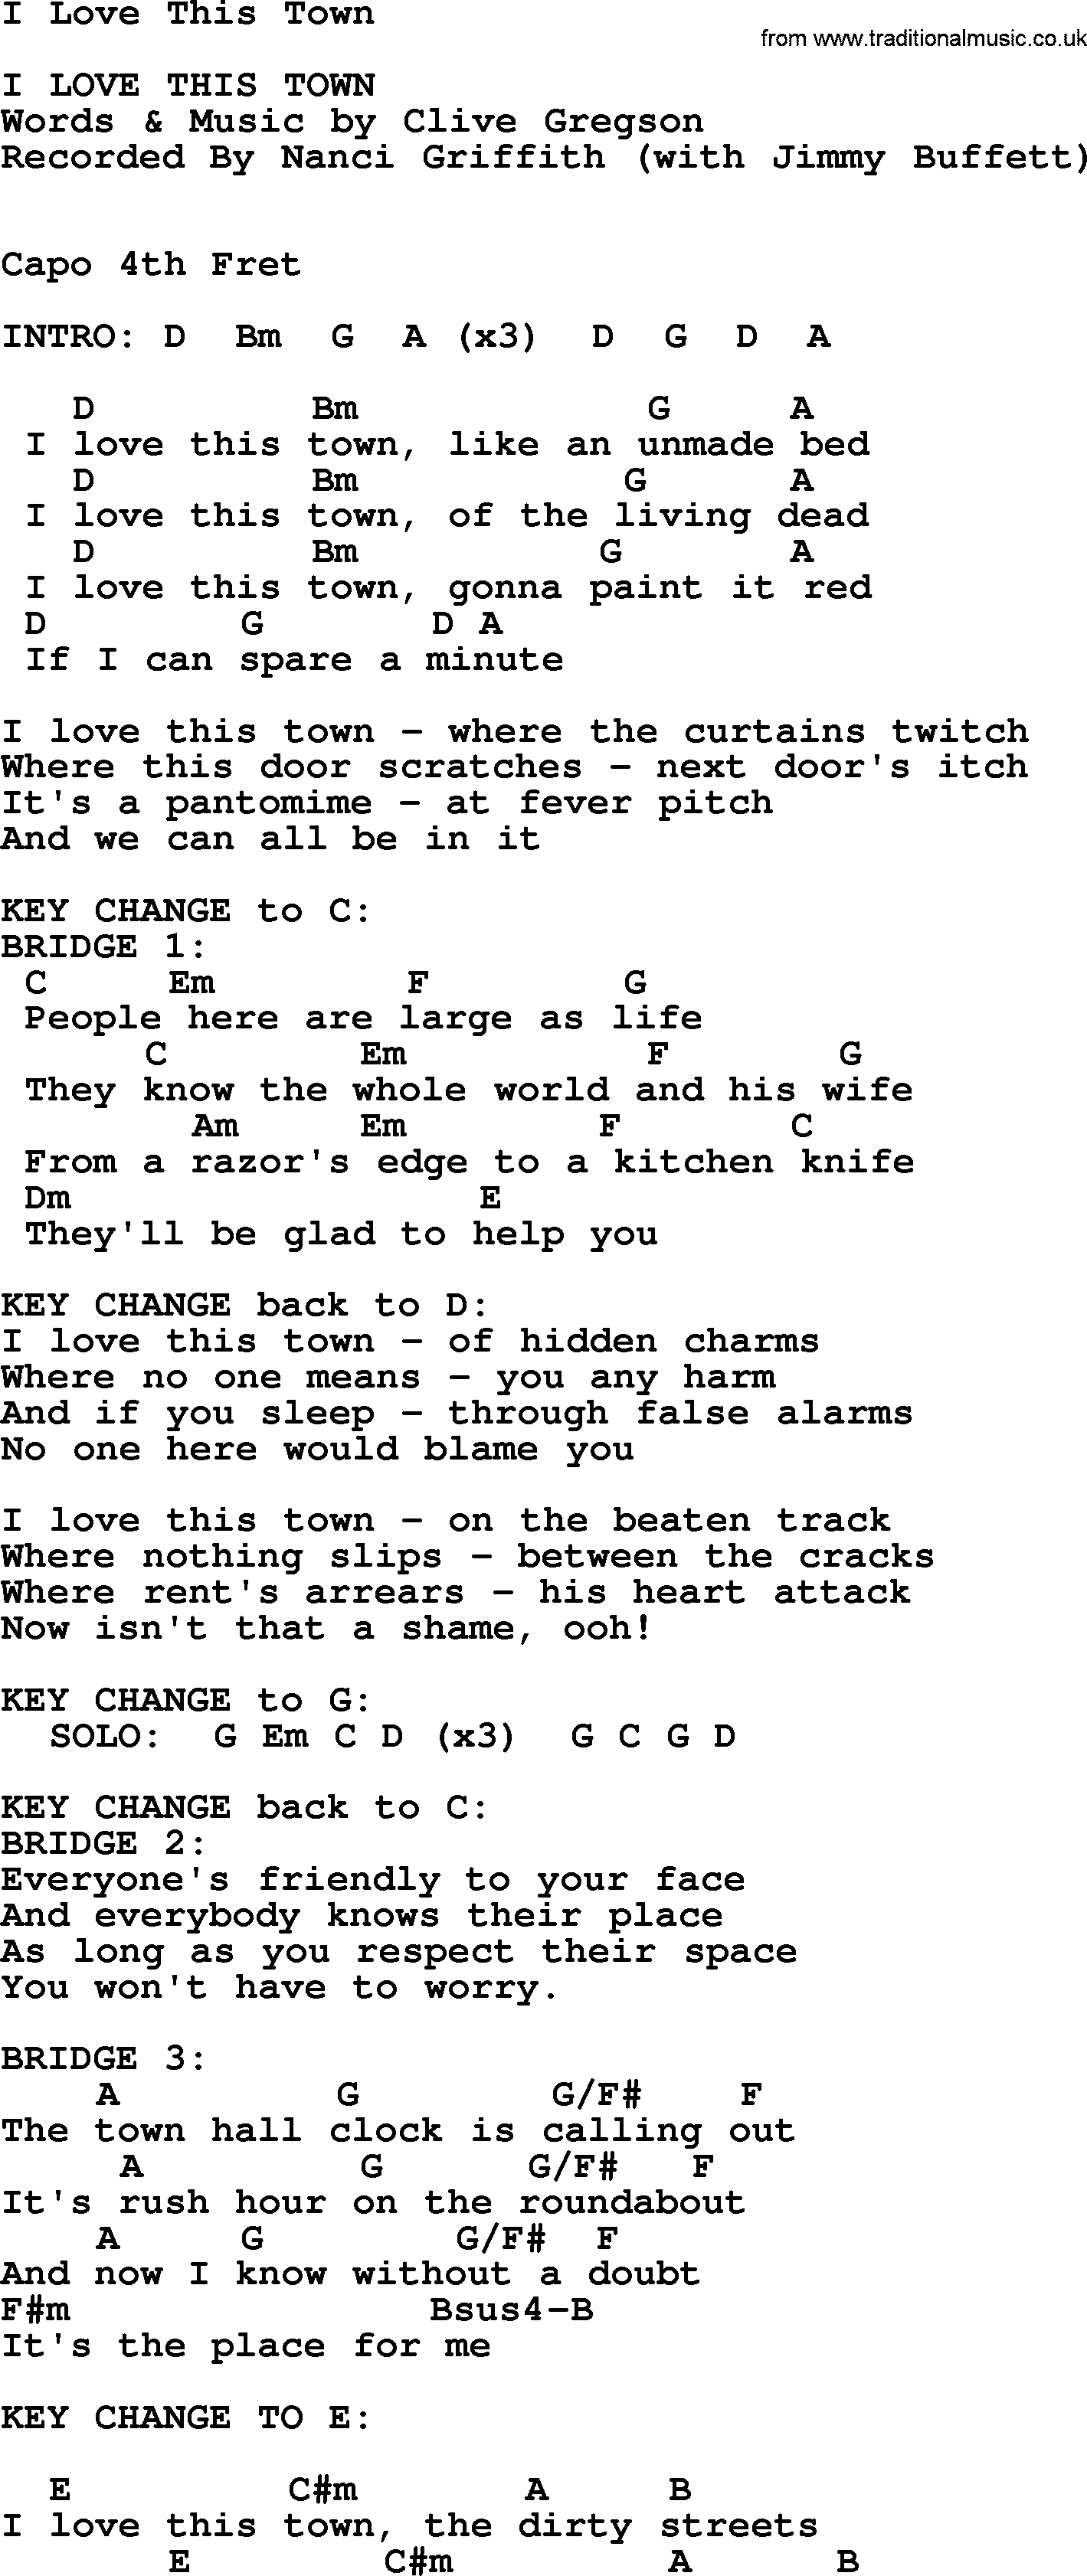 Bluegrass song: I Love This Town, lyrics and chords